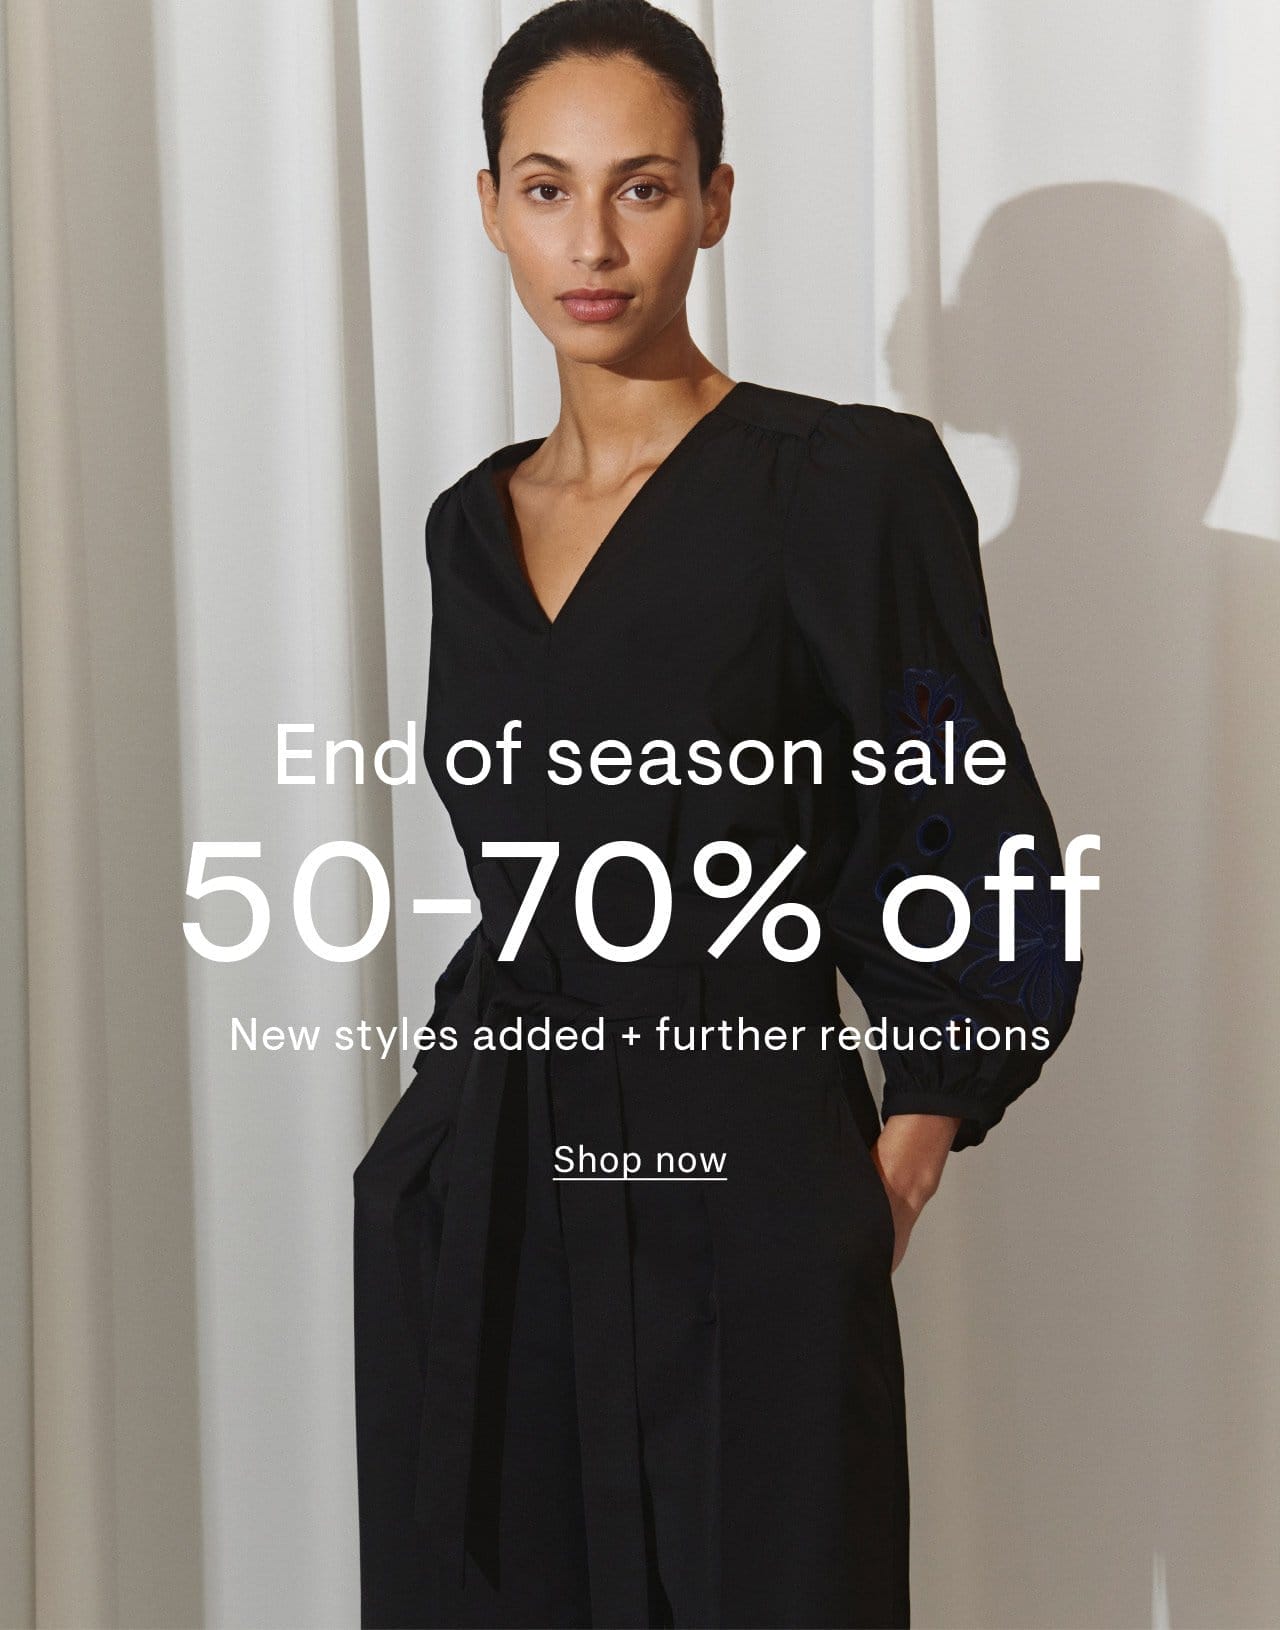 End of season sale - 50-70% off - new styles added